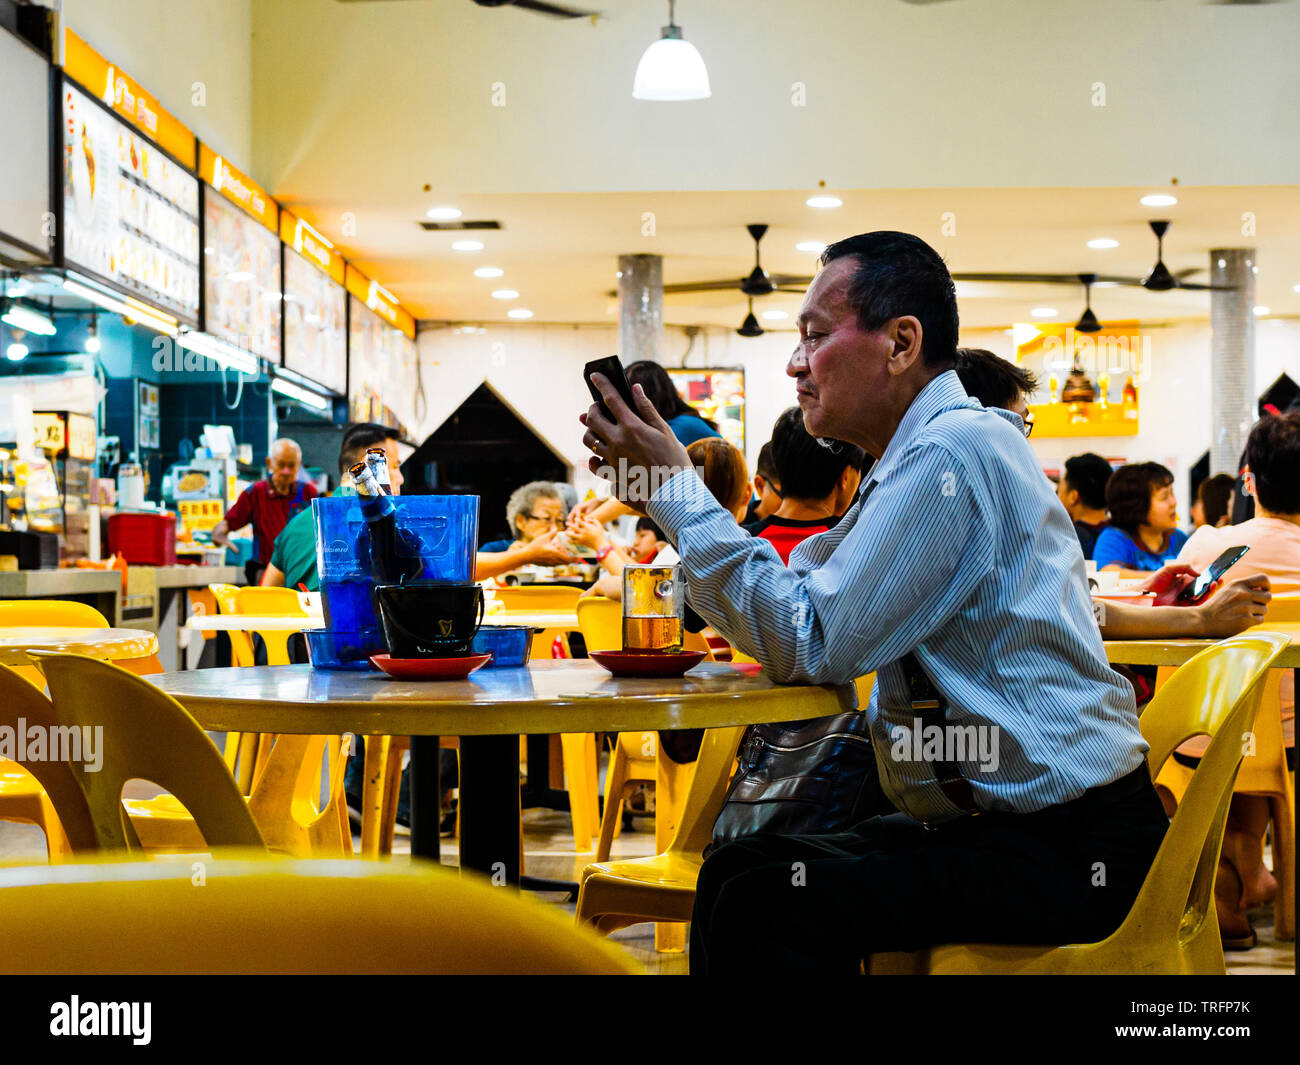 SINGAPORE - 17 MAR 2019 - A middle aged man in office attire enjoys a late night beer at an eatery / coffeeshop / kopitiam, / hawker centre Stock Photo